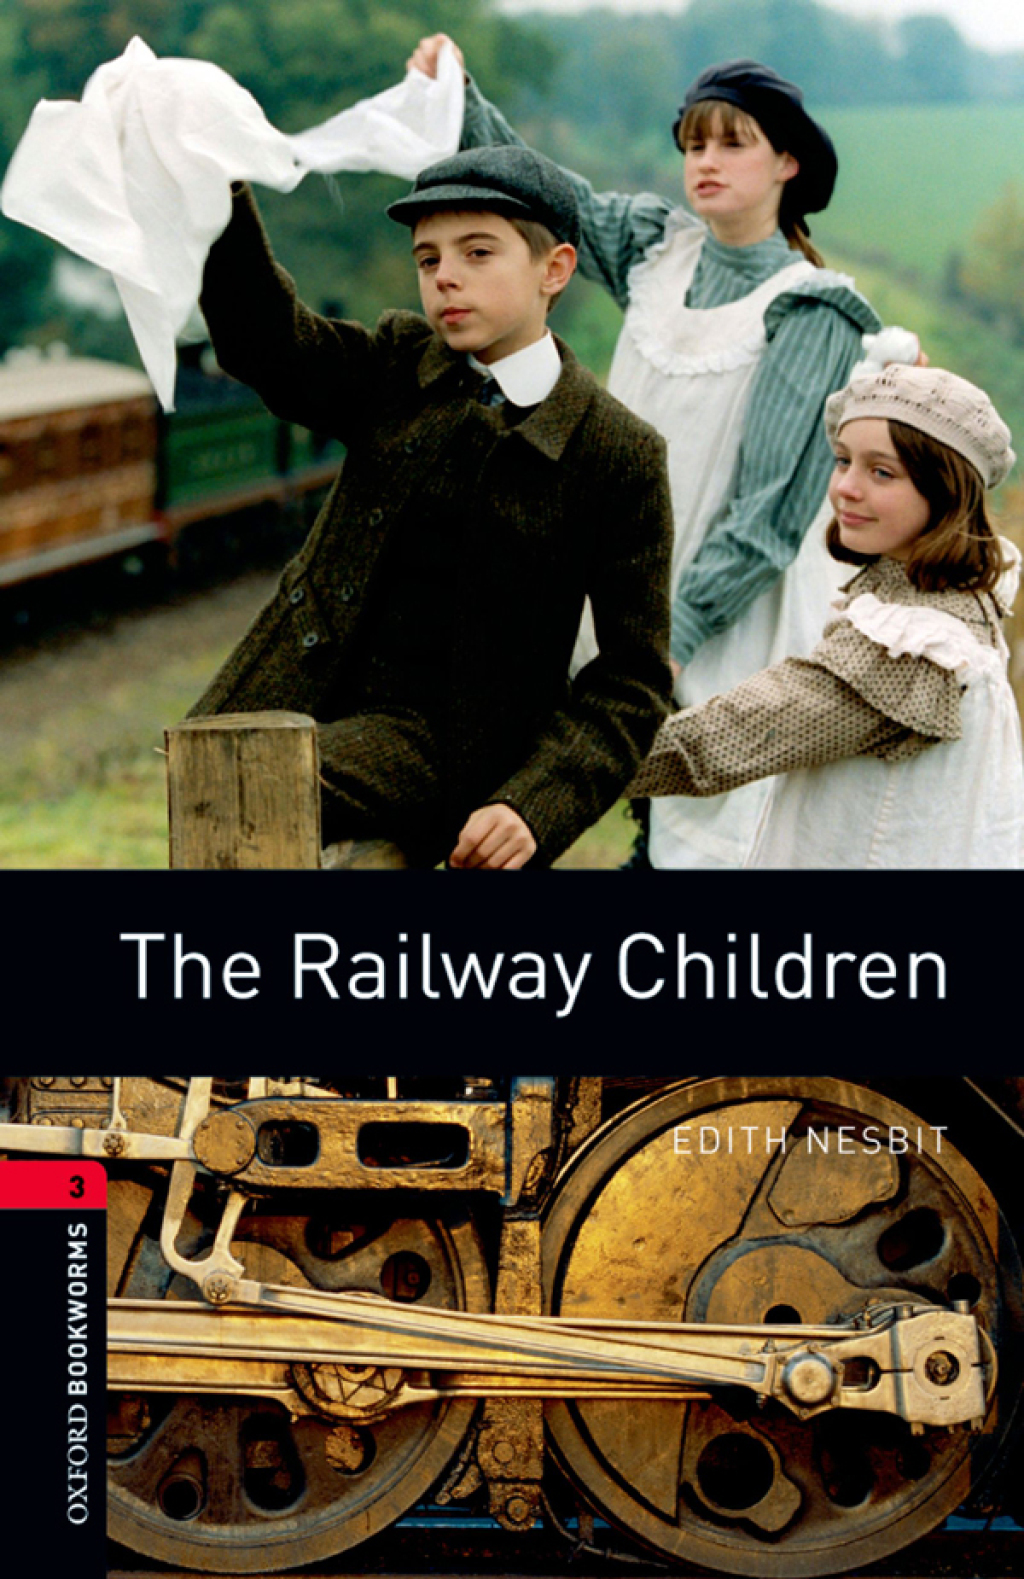 The Railway Children Level 3 Oxford Bookworms Library - 3rd Edition (eBook Rental)